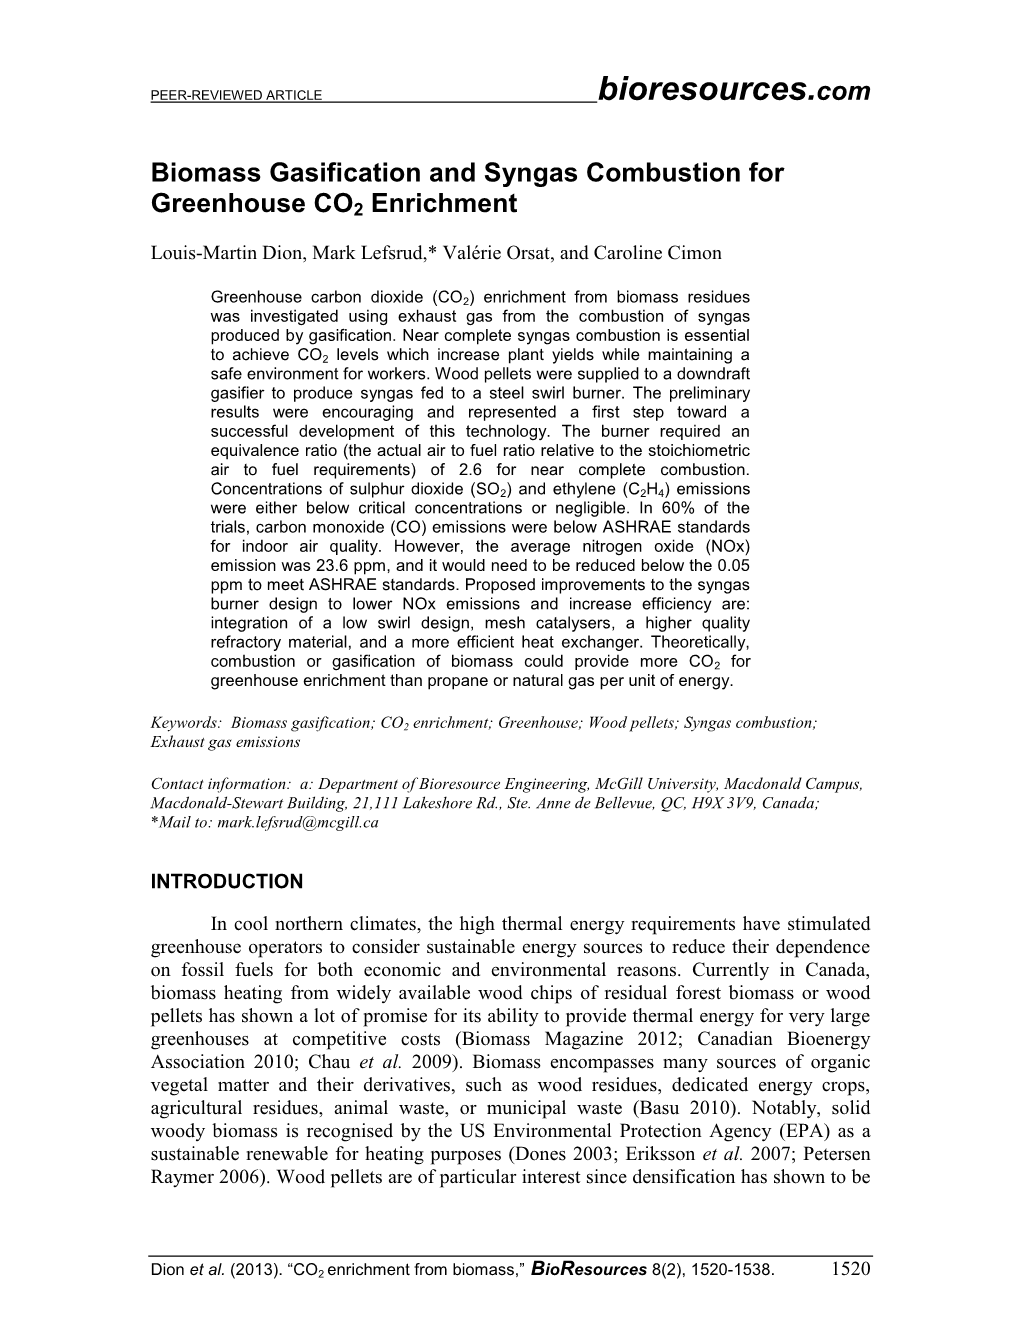 Biomass Gasification and Syngas Combustion for Greenhouse CO2 Enrichment